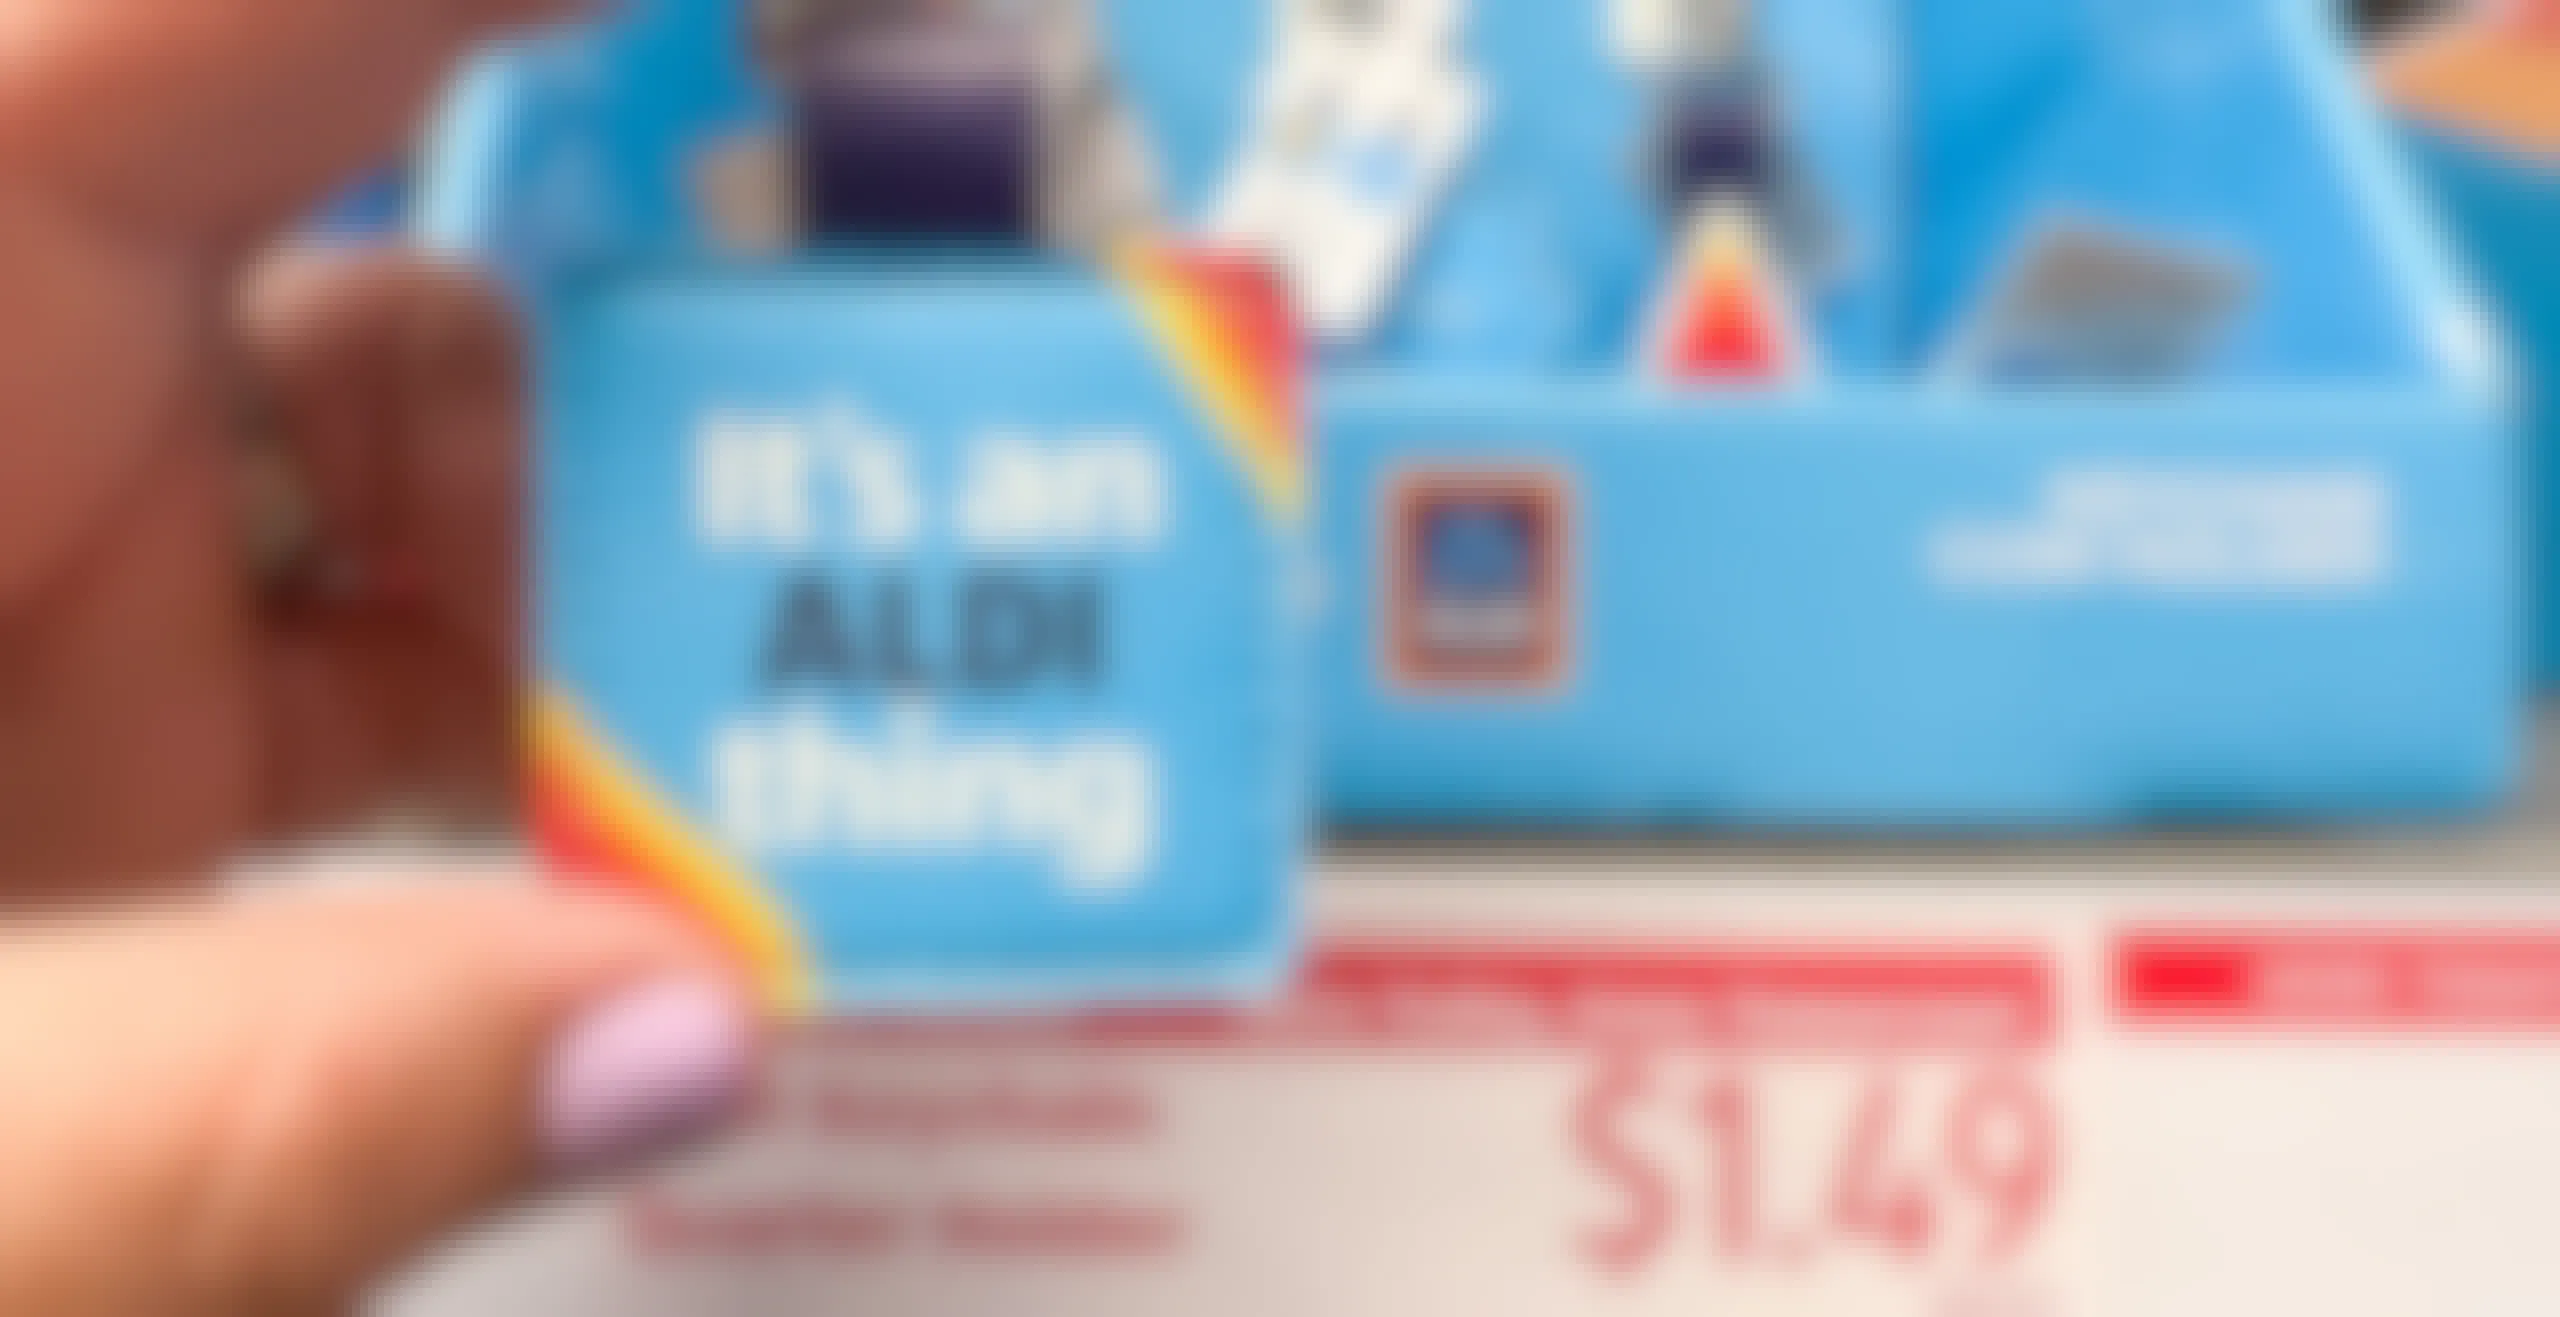 New $1.49 Aldi Quarter Holders Just Dropped on March 22 — Check Your Stores